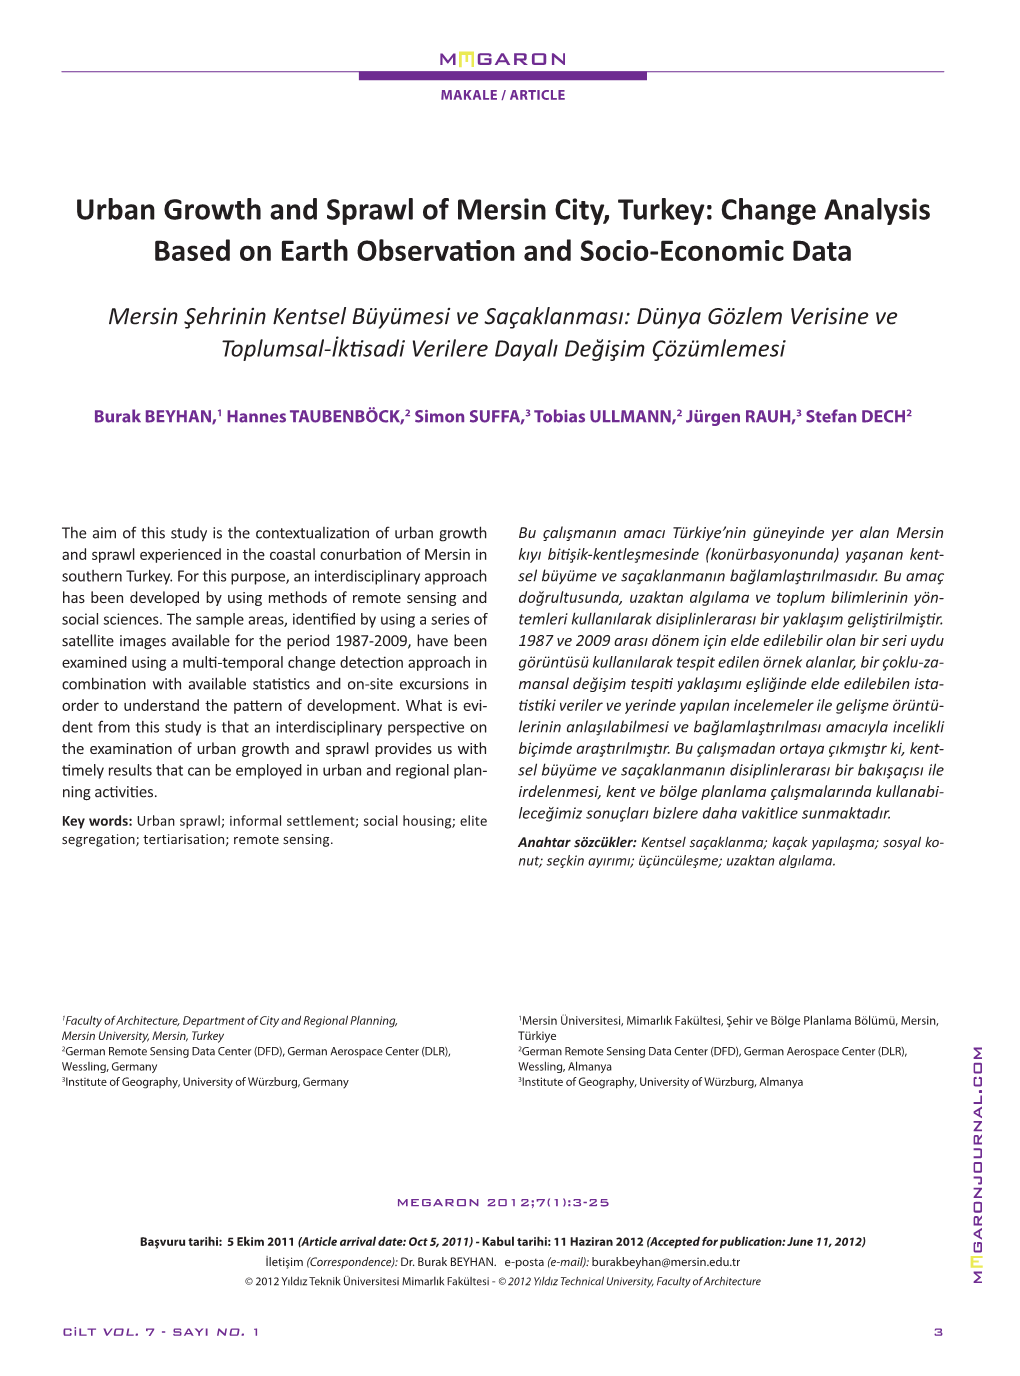 Urban Growth and Sprawl of Mersin City, Turkey: Change Analysis Based on Earth Observation and Socio-Economic Data